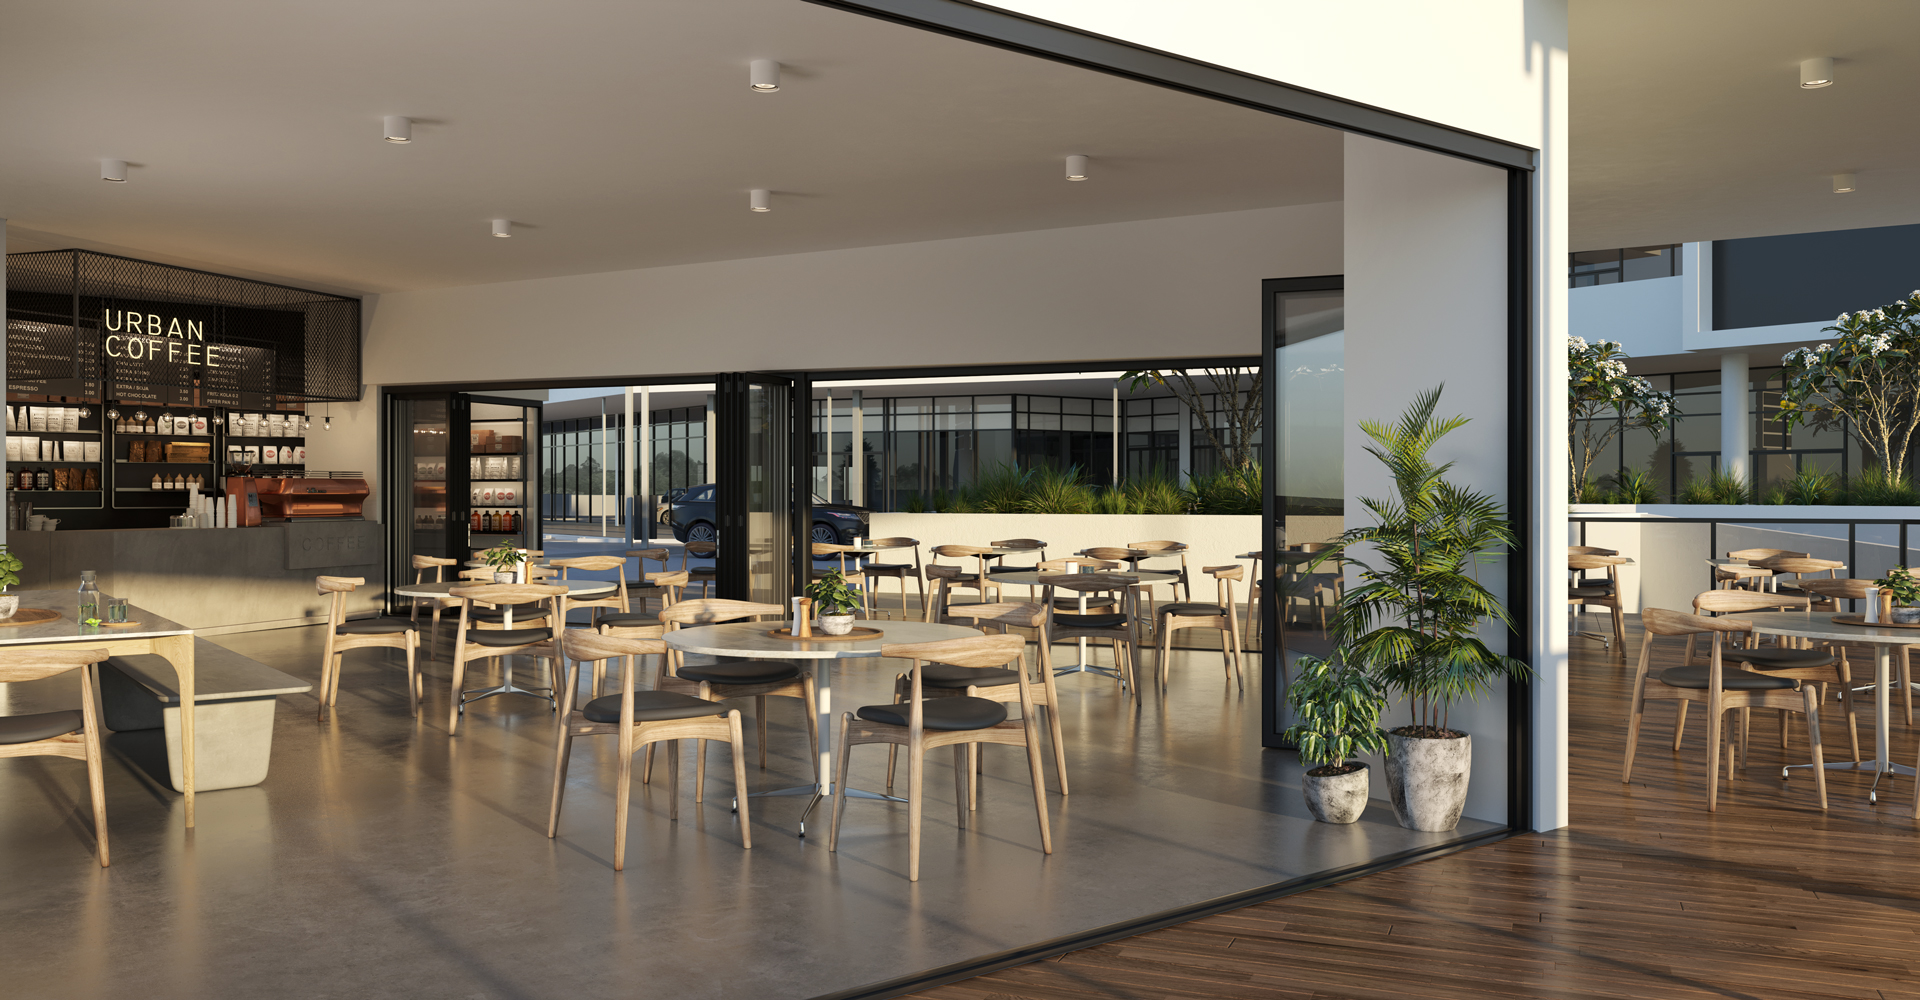 Looking to an open planned modern cafe that opens to the outside through large sliding doors